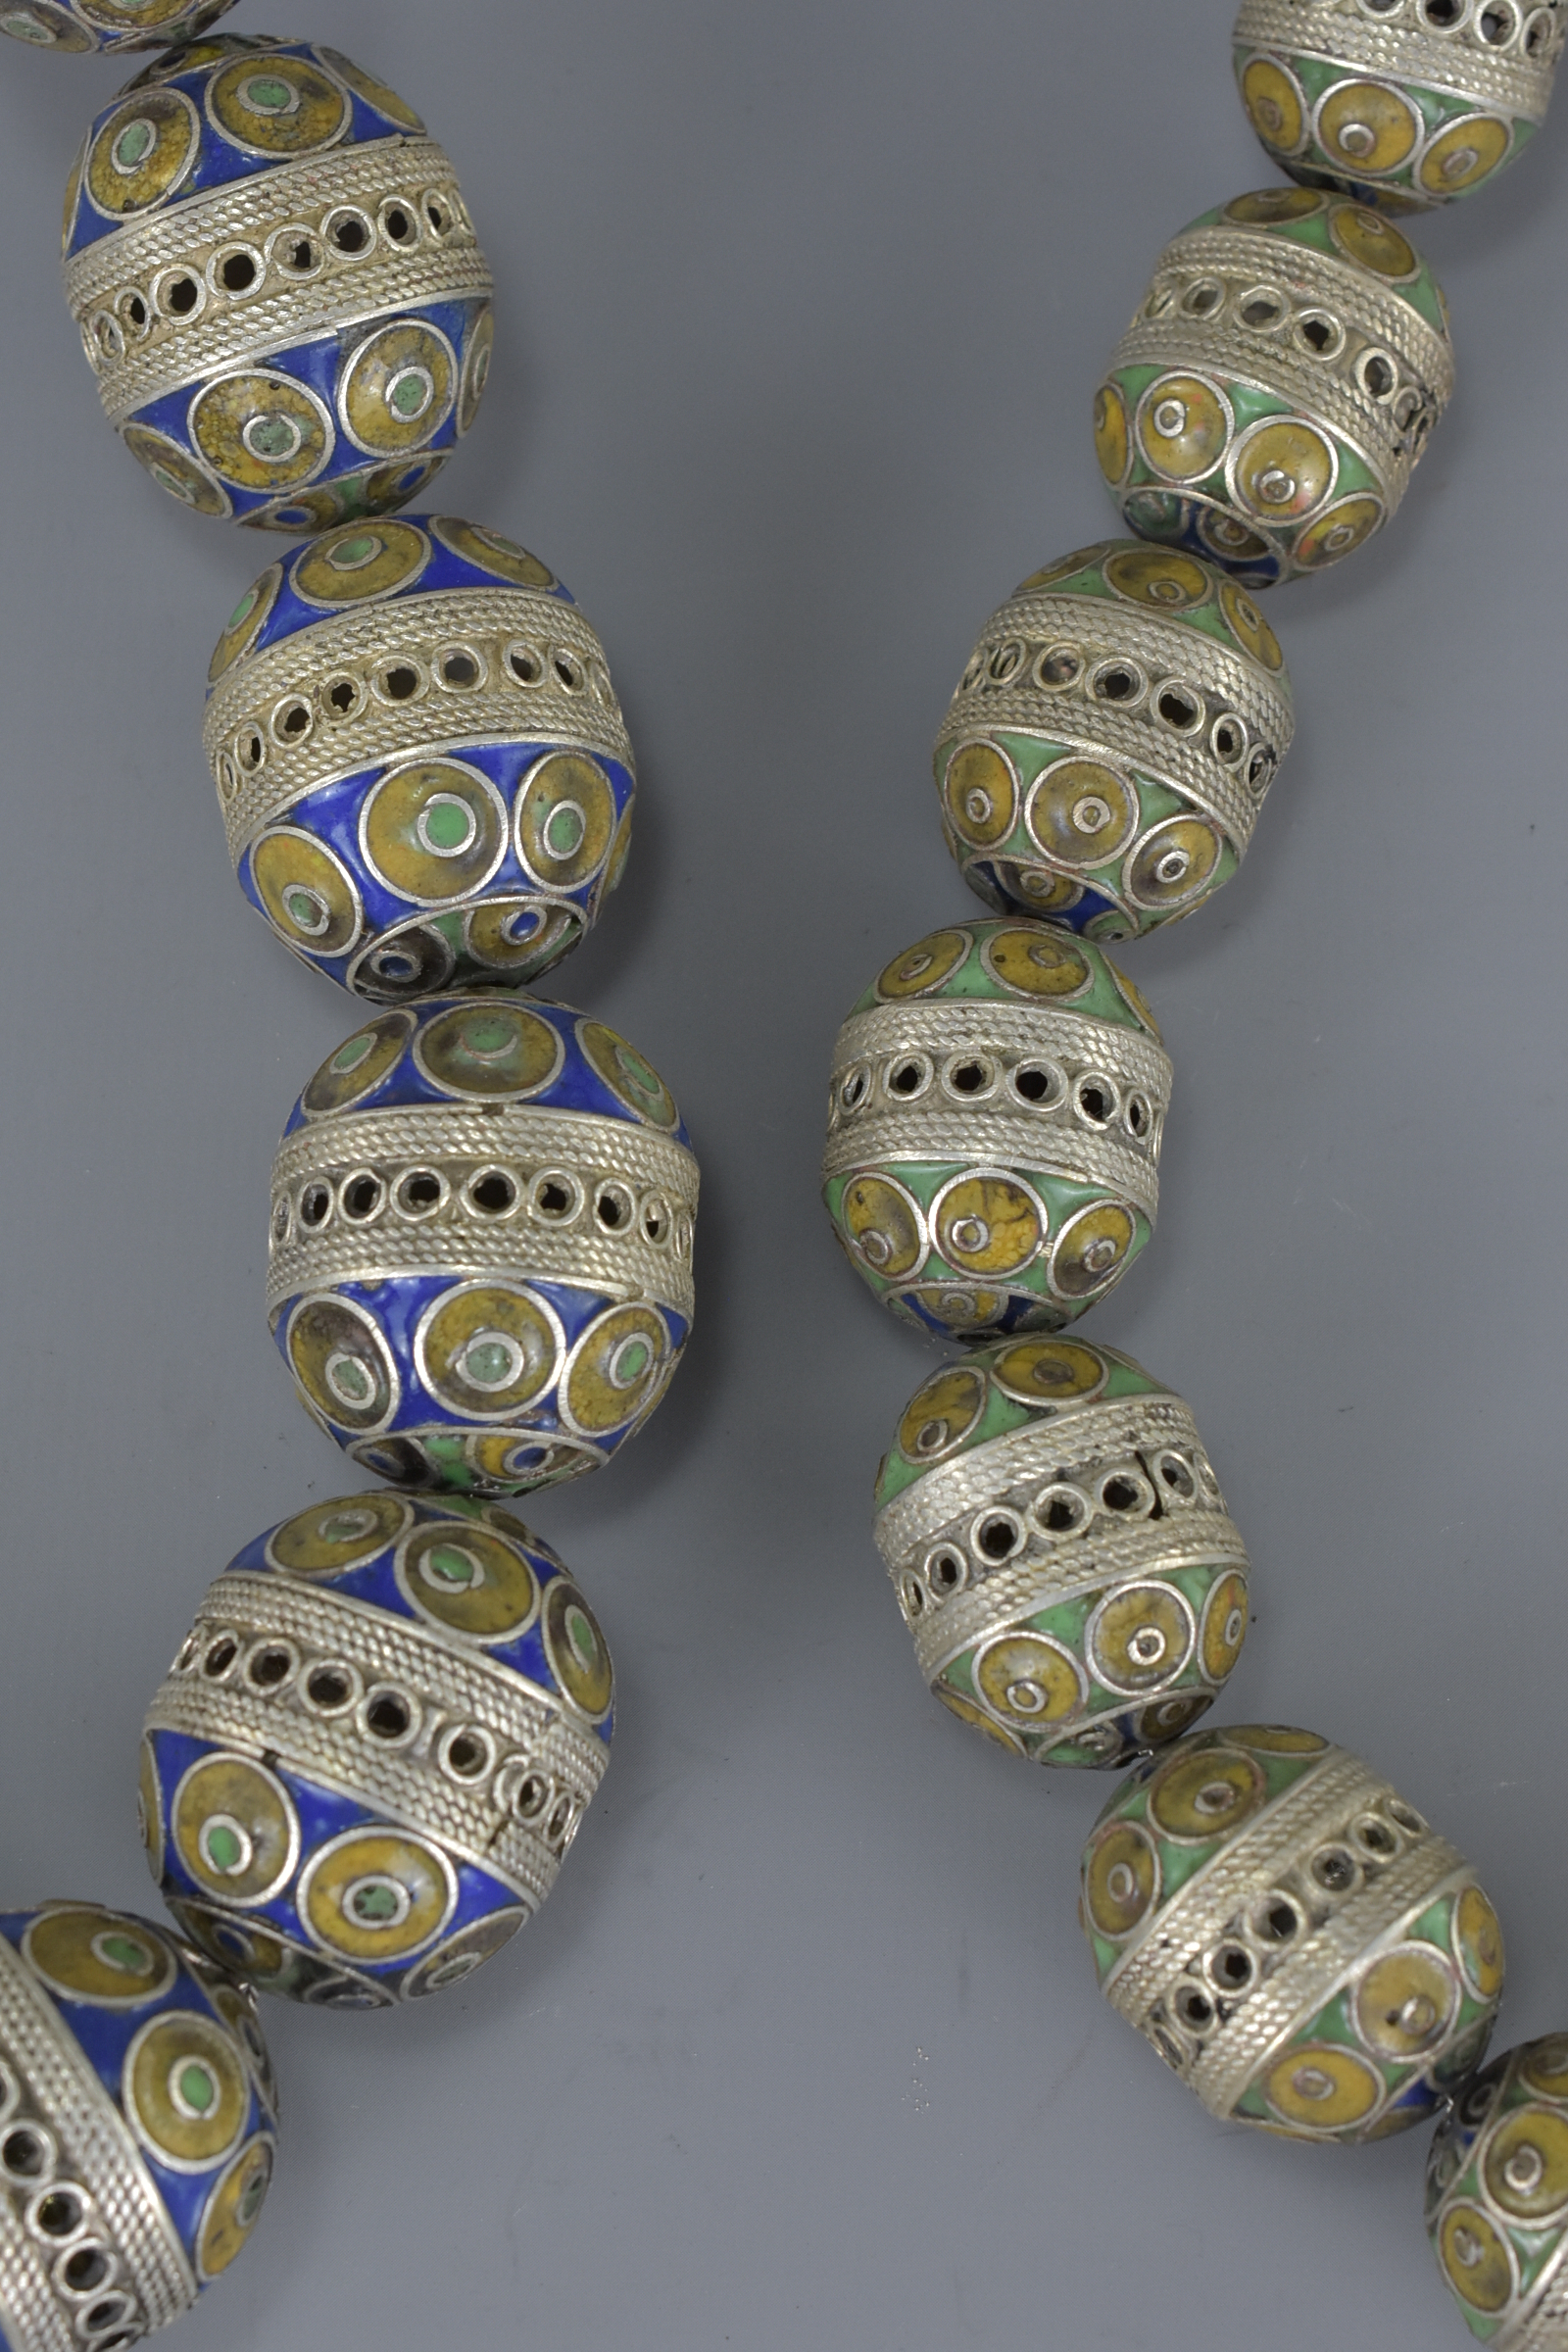 Two groups of Moroccan Berber enamel beads - Image 4 of 6